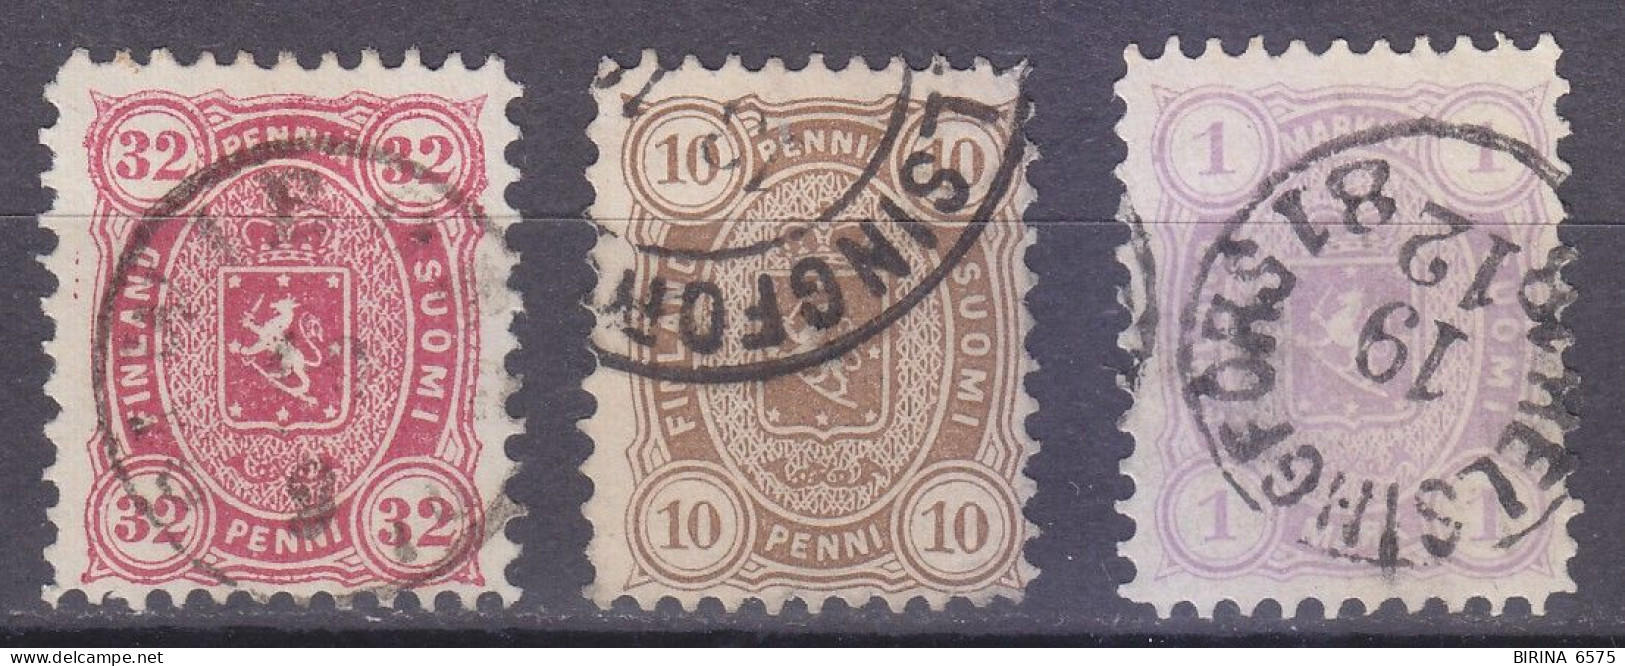 Finland. 1875. Perf 11. 10, 32 Pen, 1 Mark.  3 Stamps. 280 €. High Cat. Value - M - Usati